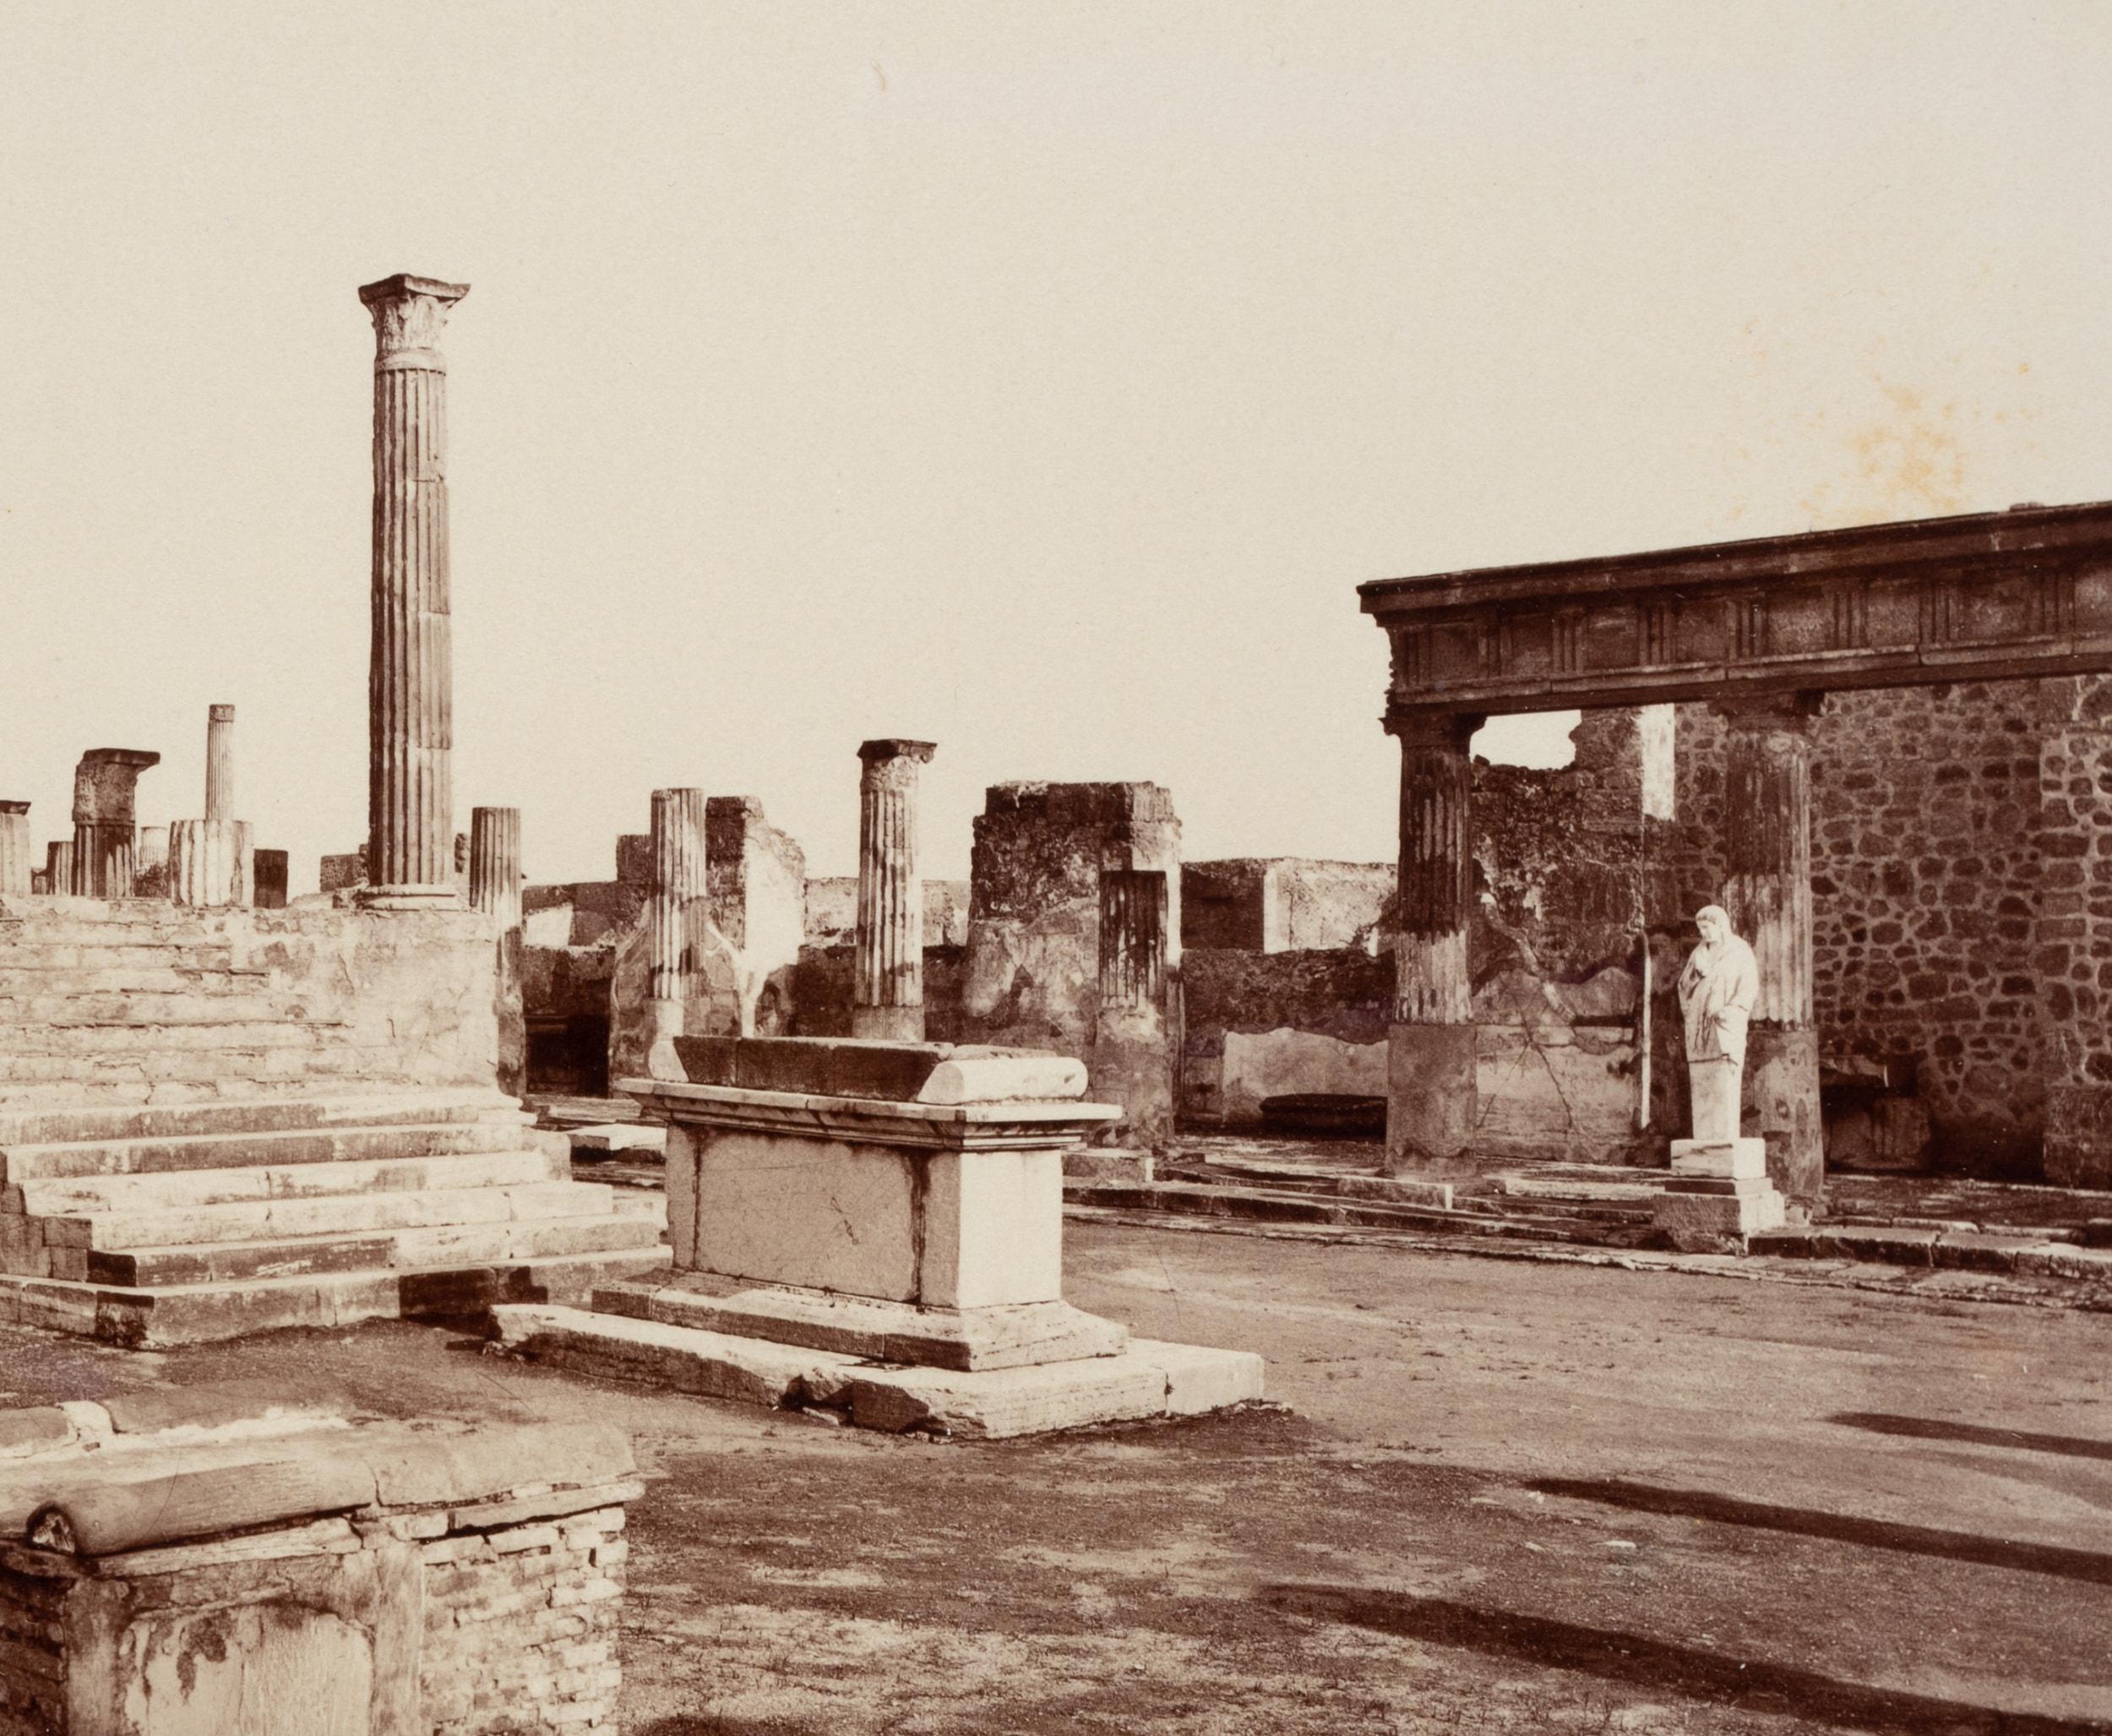 Fratelli Alinari (19th century): Pompei Temple of Apollo with ruins and columns, c. 1880, albumen paper print

Technique: albumen paper print

Inscription: Lower middle signed in the printing plate: 